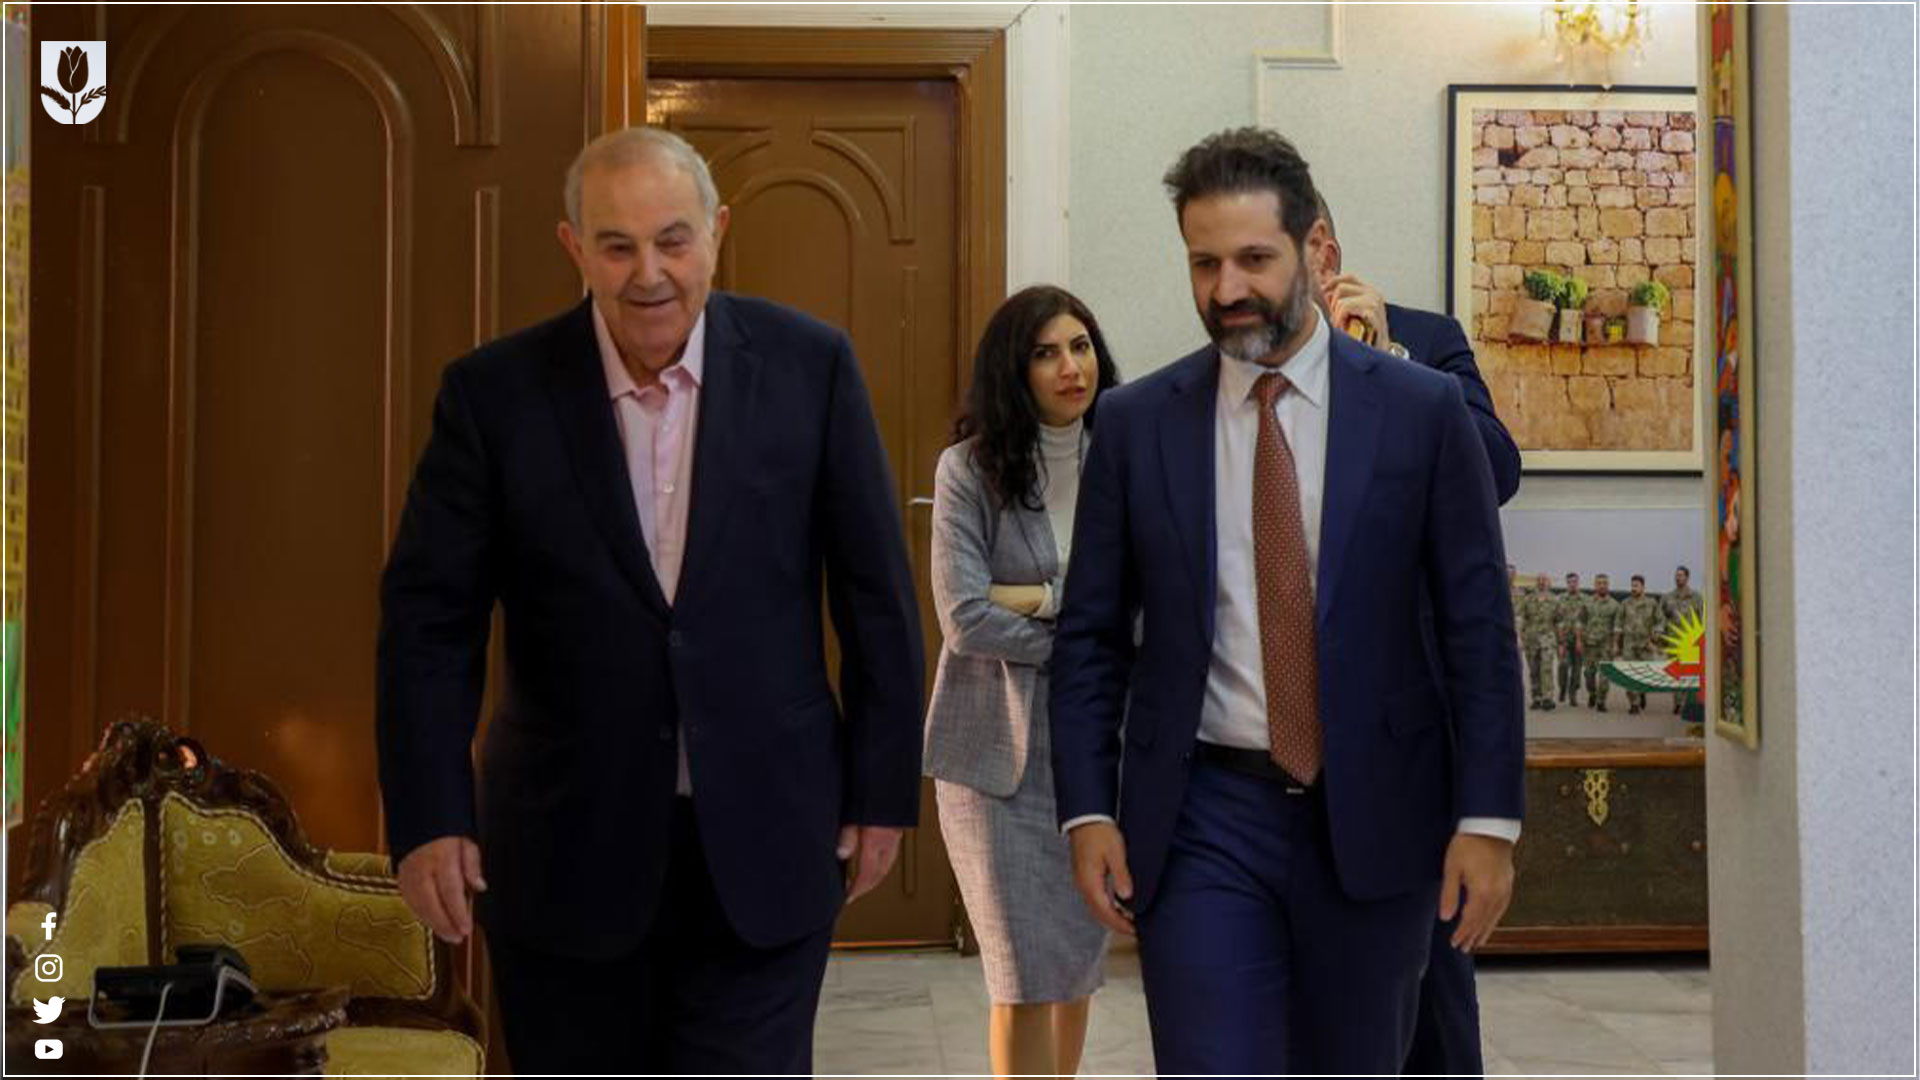  Qubad Talabani on the right and Ayad Allawi on the left